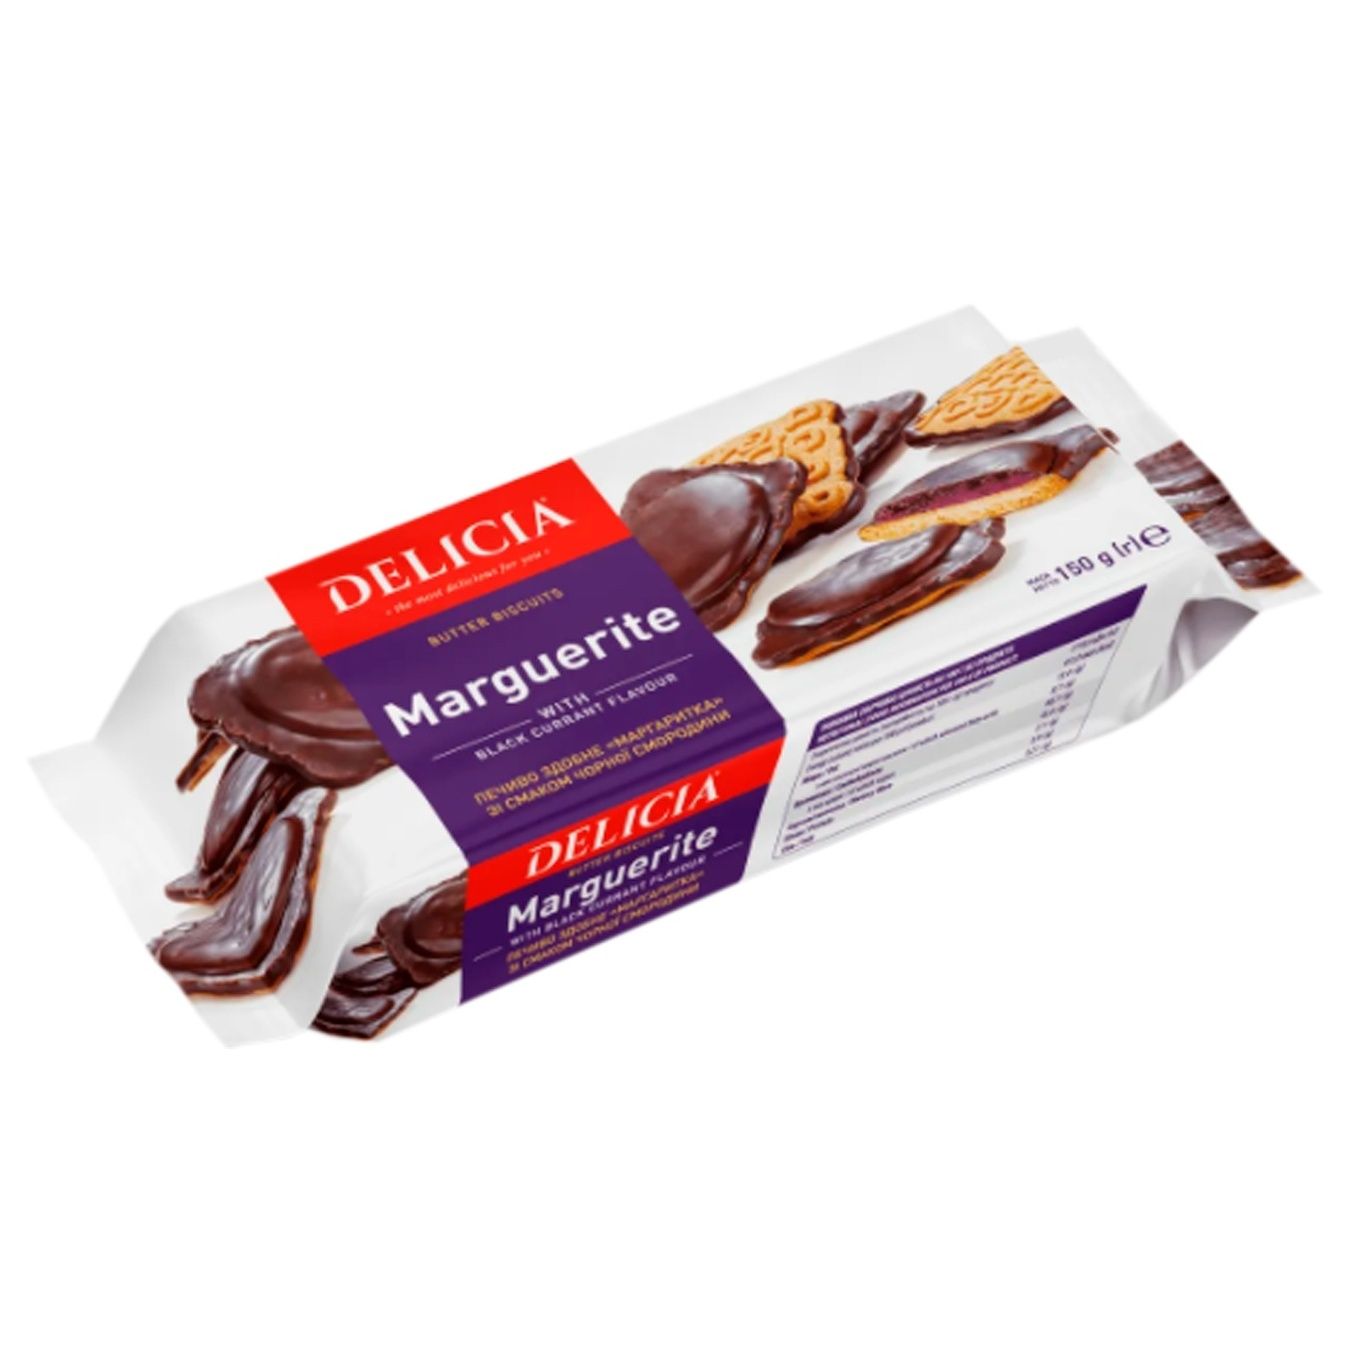 Delicia Margarytka With Black Currant In Durk Glaze Butter Cookies 150g